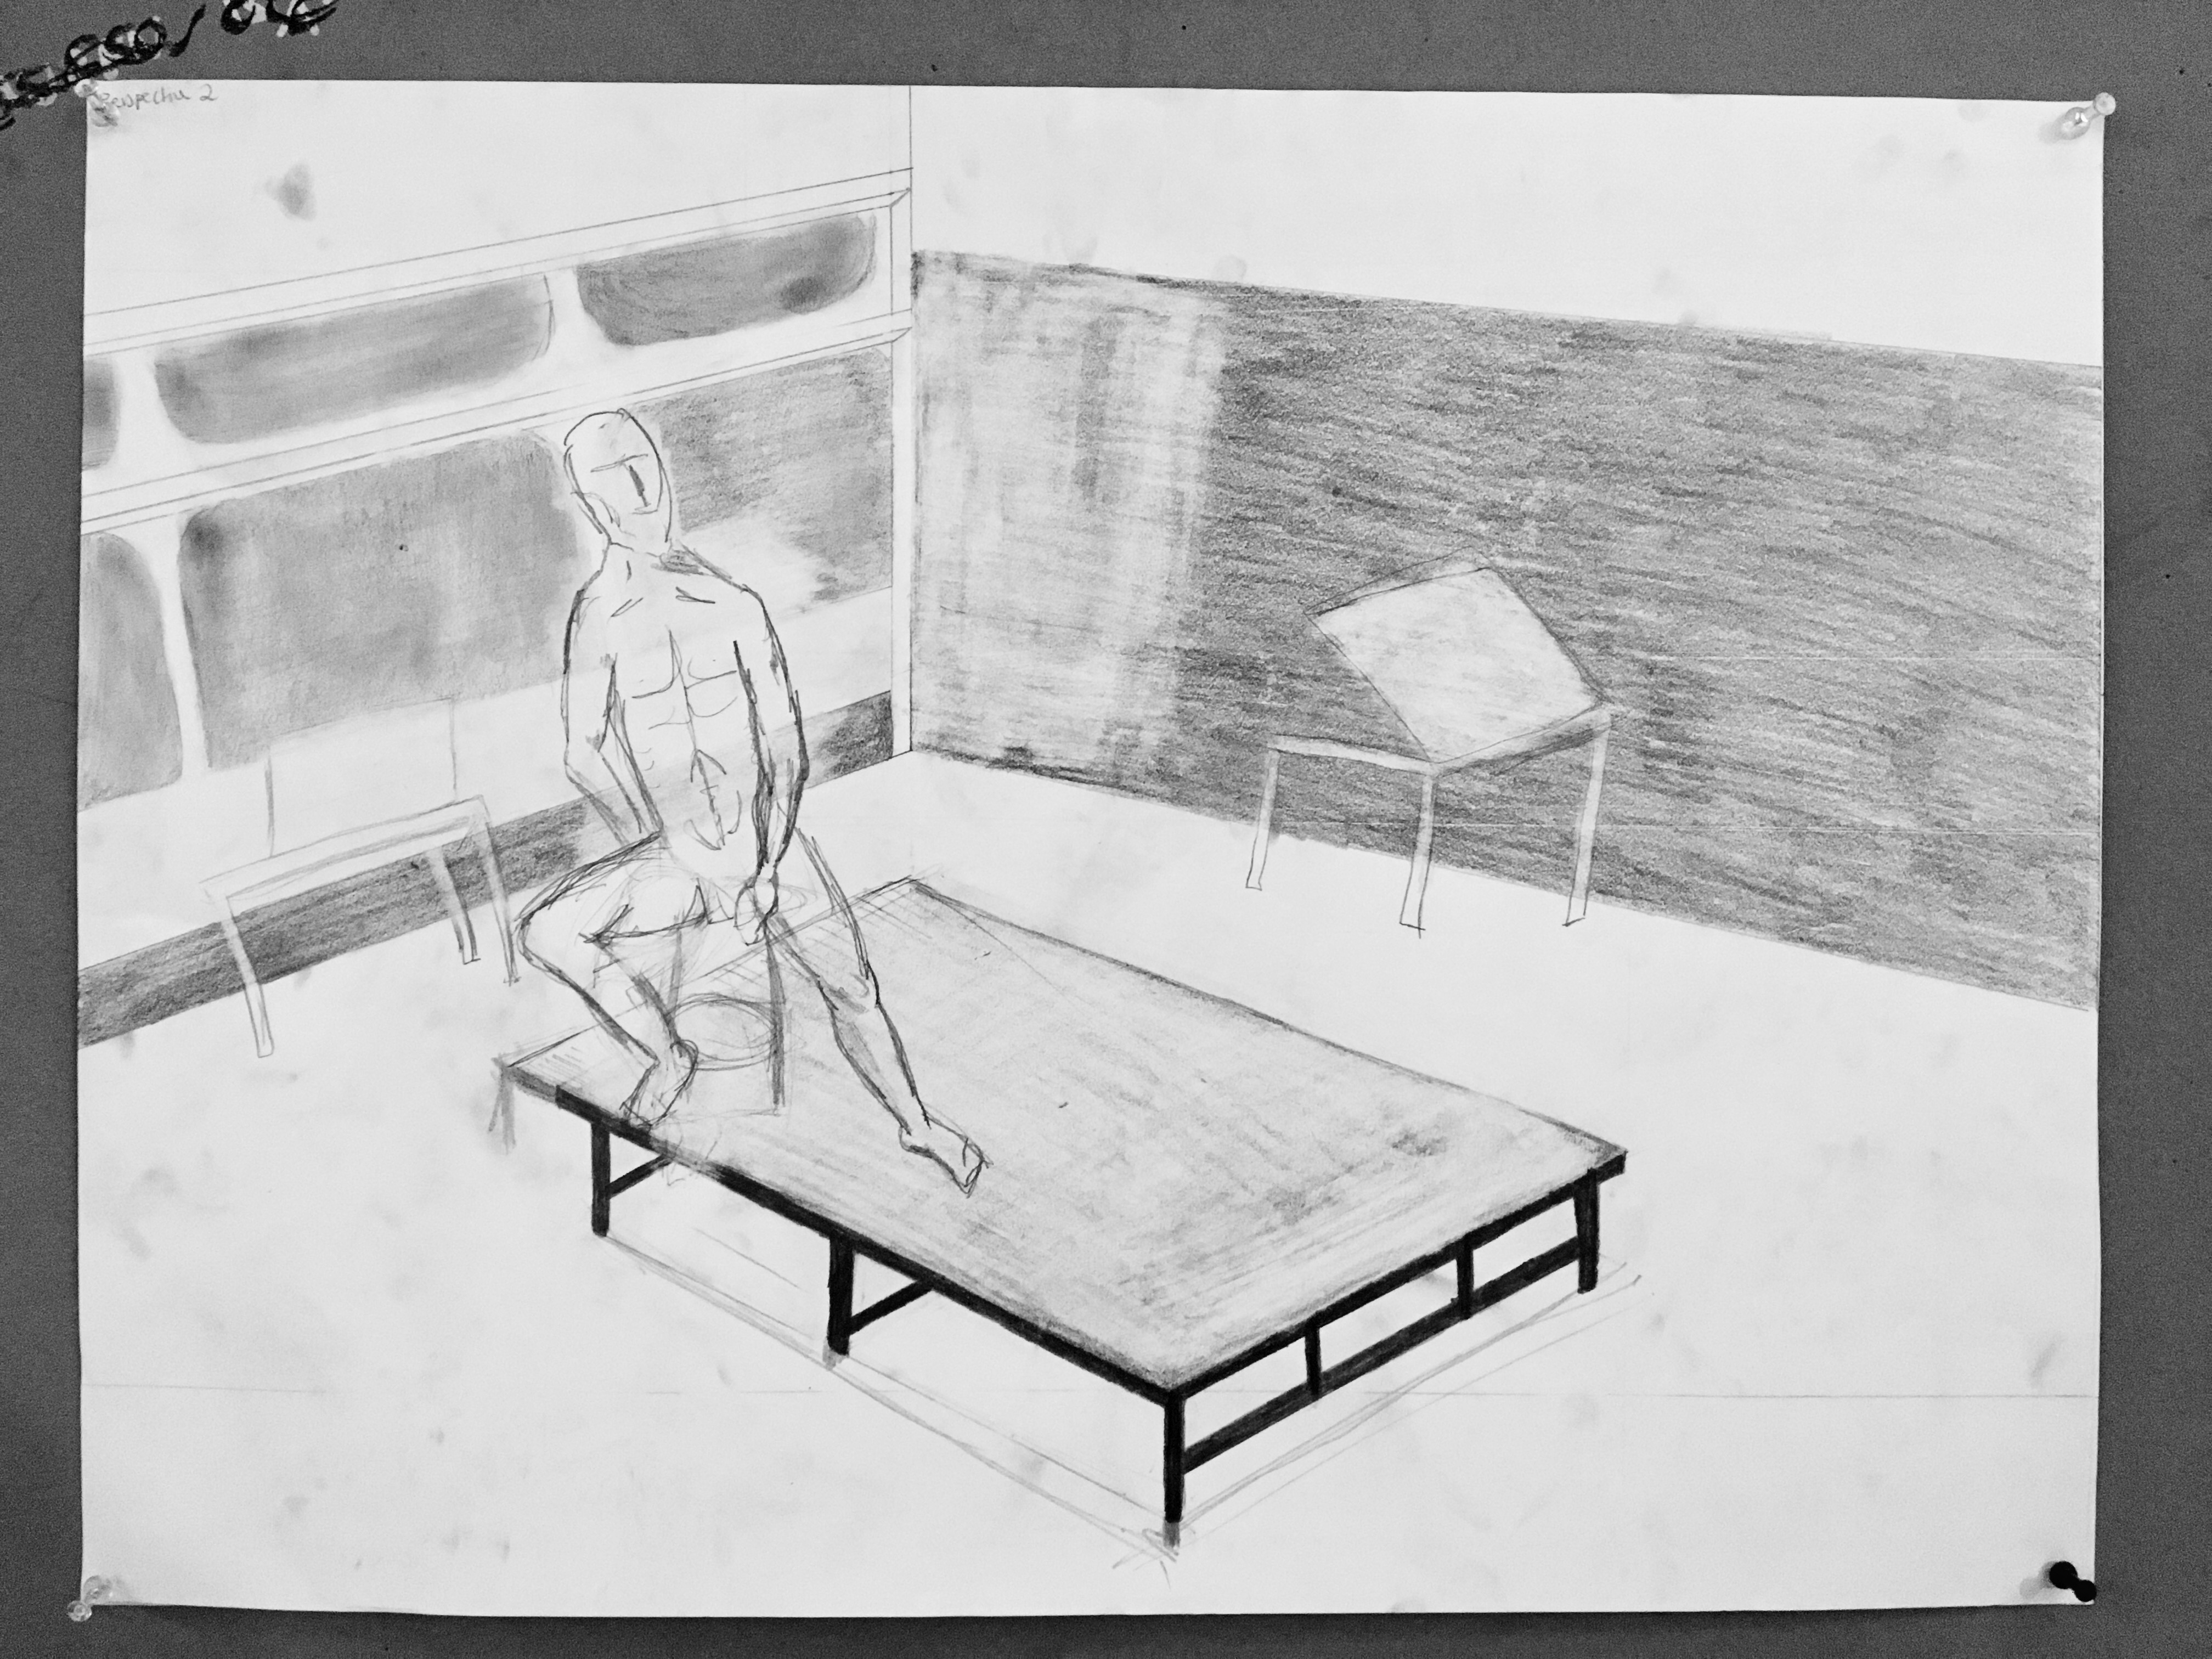 Drawing and Imaging: Perspective Drawings